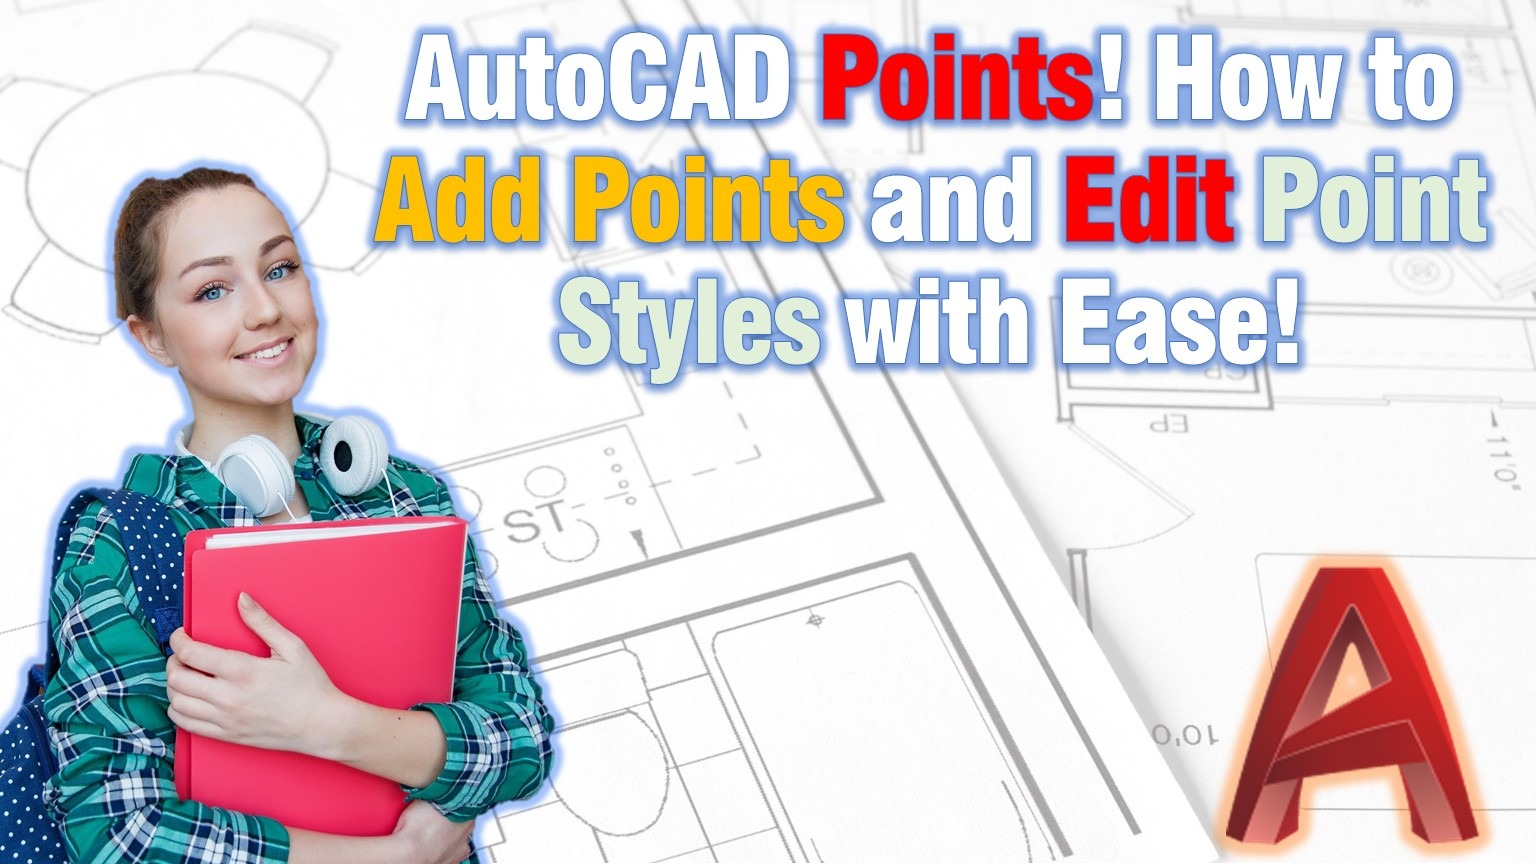 How to Add Points and Edit Point Styles in AutoCAD